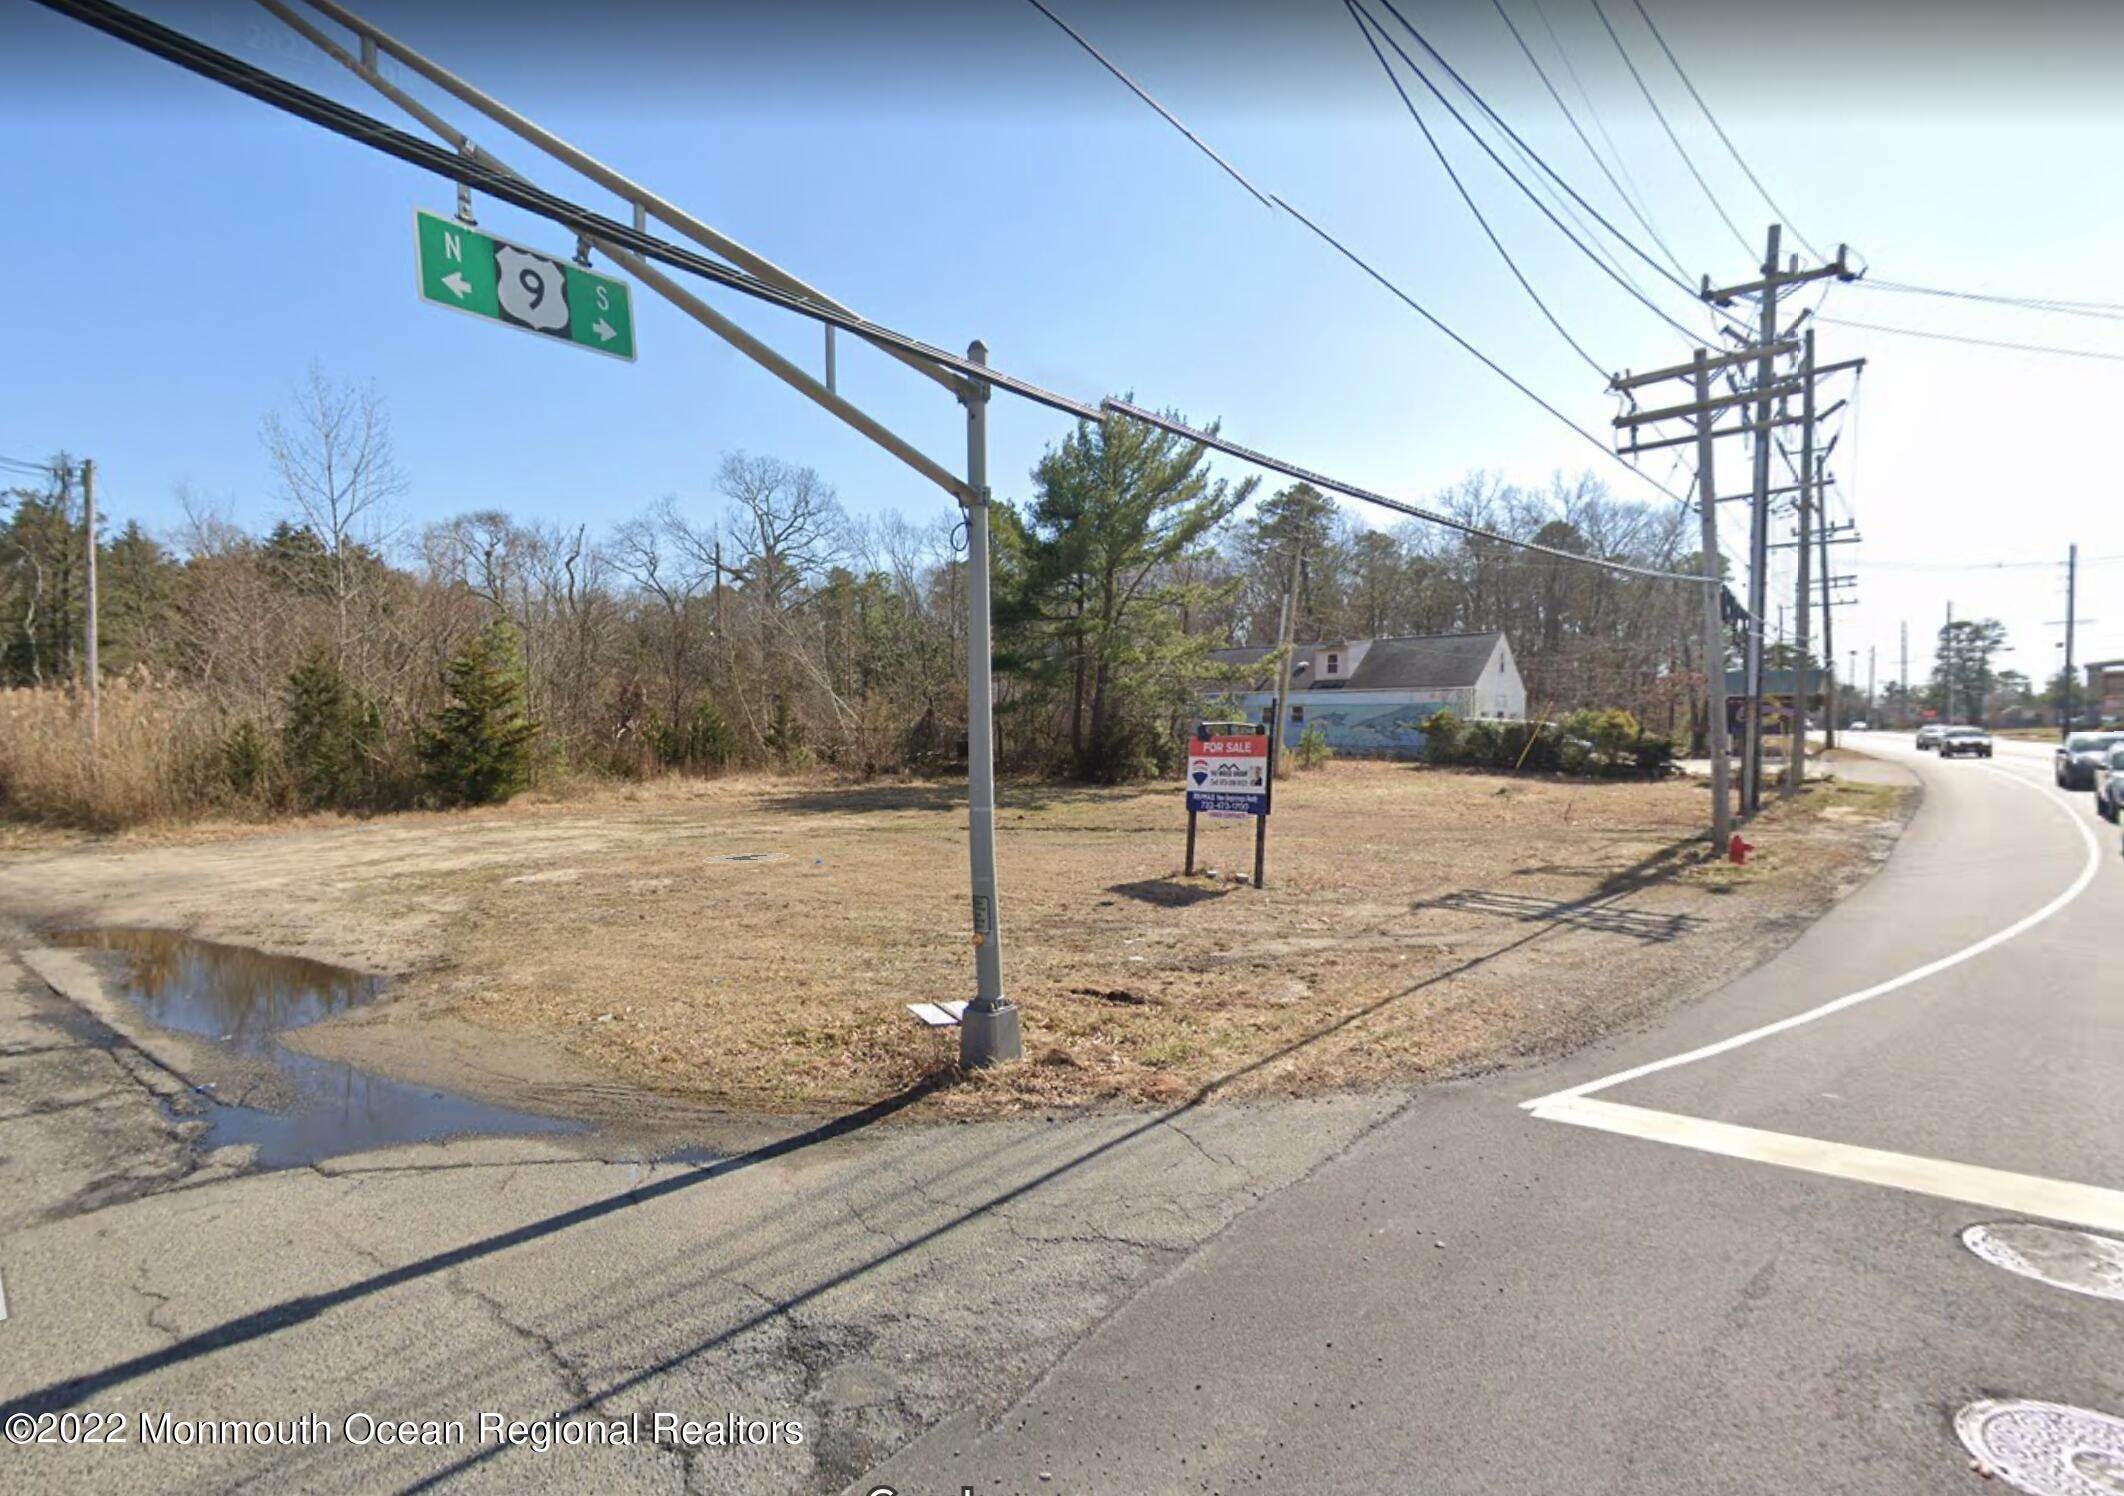 4. Land for Sale at 401 Main Street Forked River, New Jersey 08731 United States